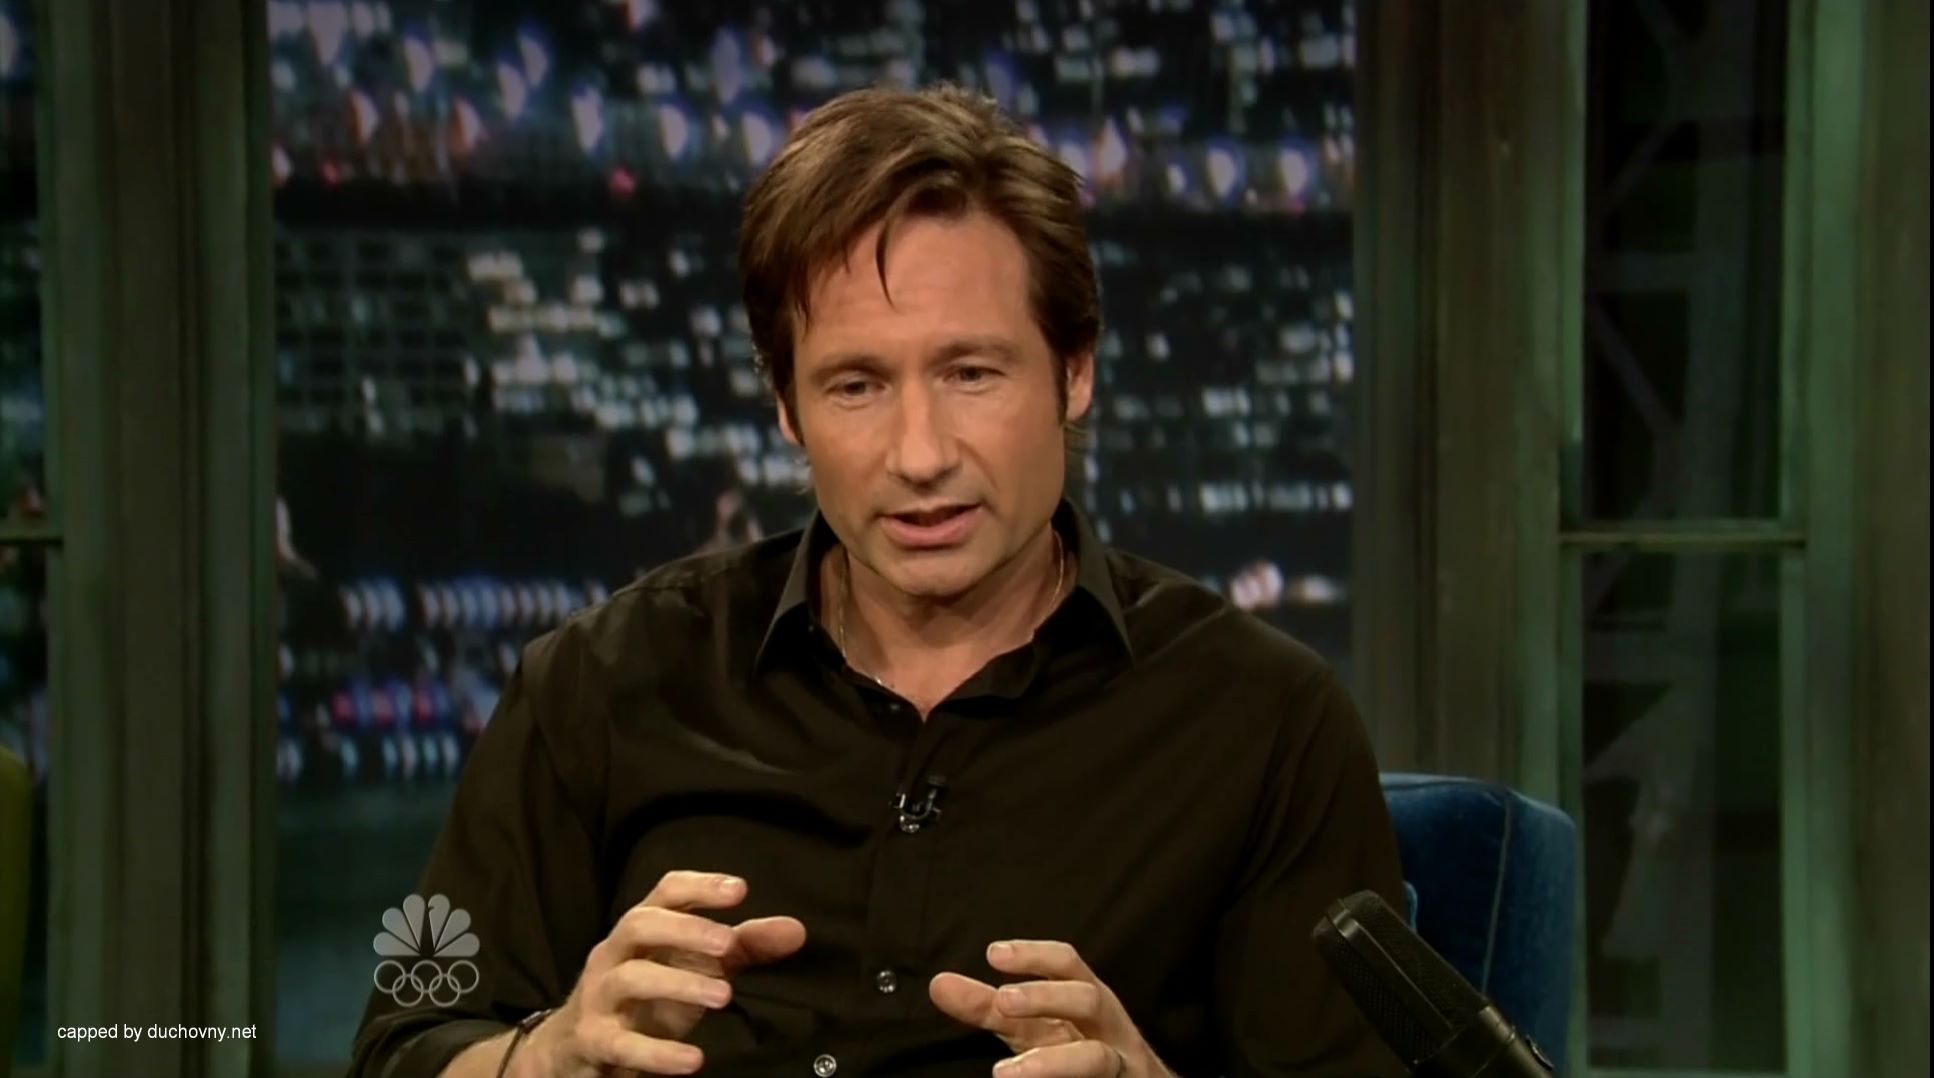 David Duchovny Images on Fanpop.